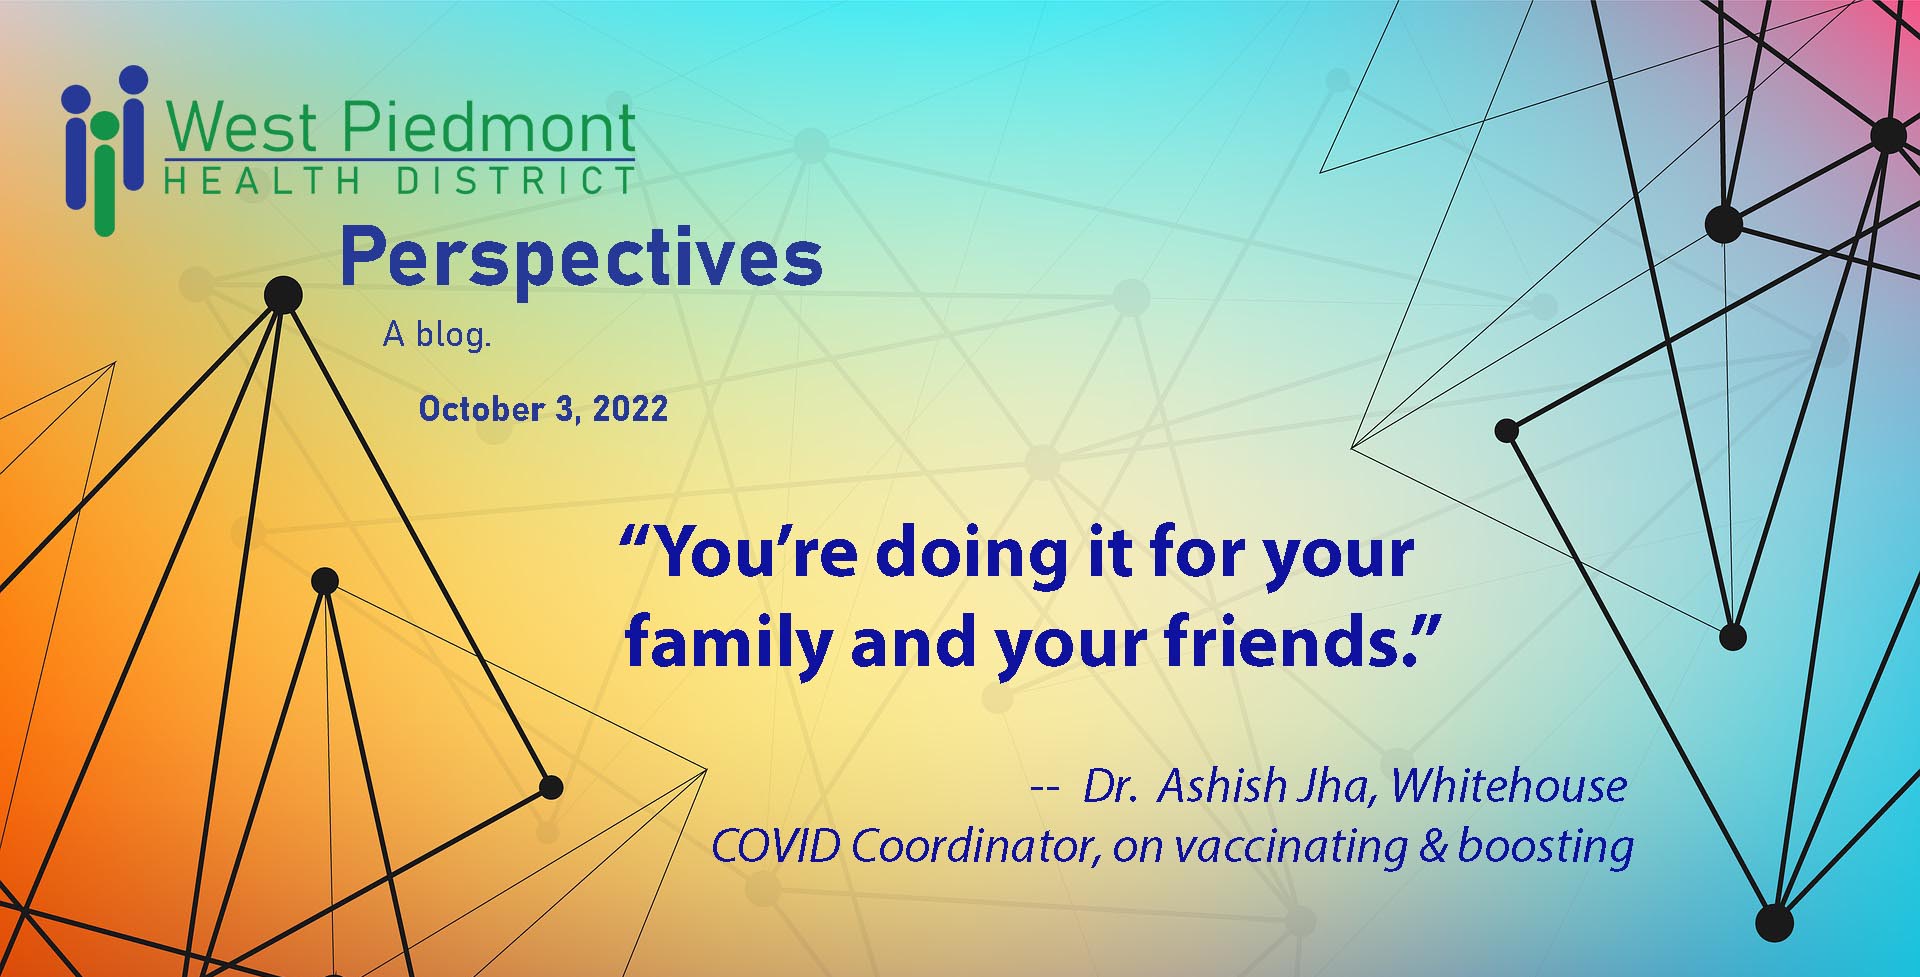 Perspectives cover quote: You're doing it for your family and your friends." - Dr. Jha Whitehouse COVID Coordinator